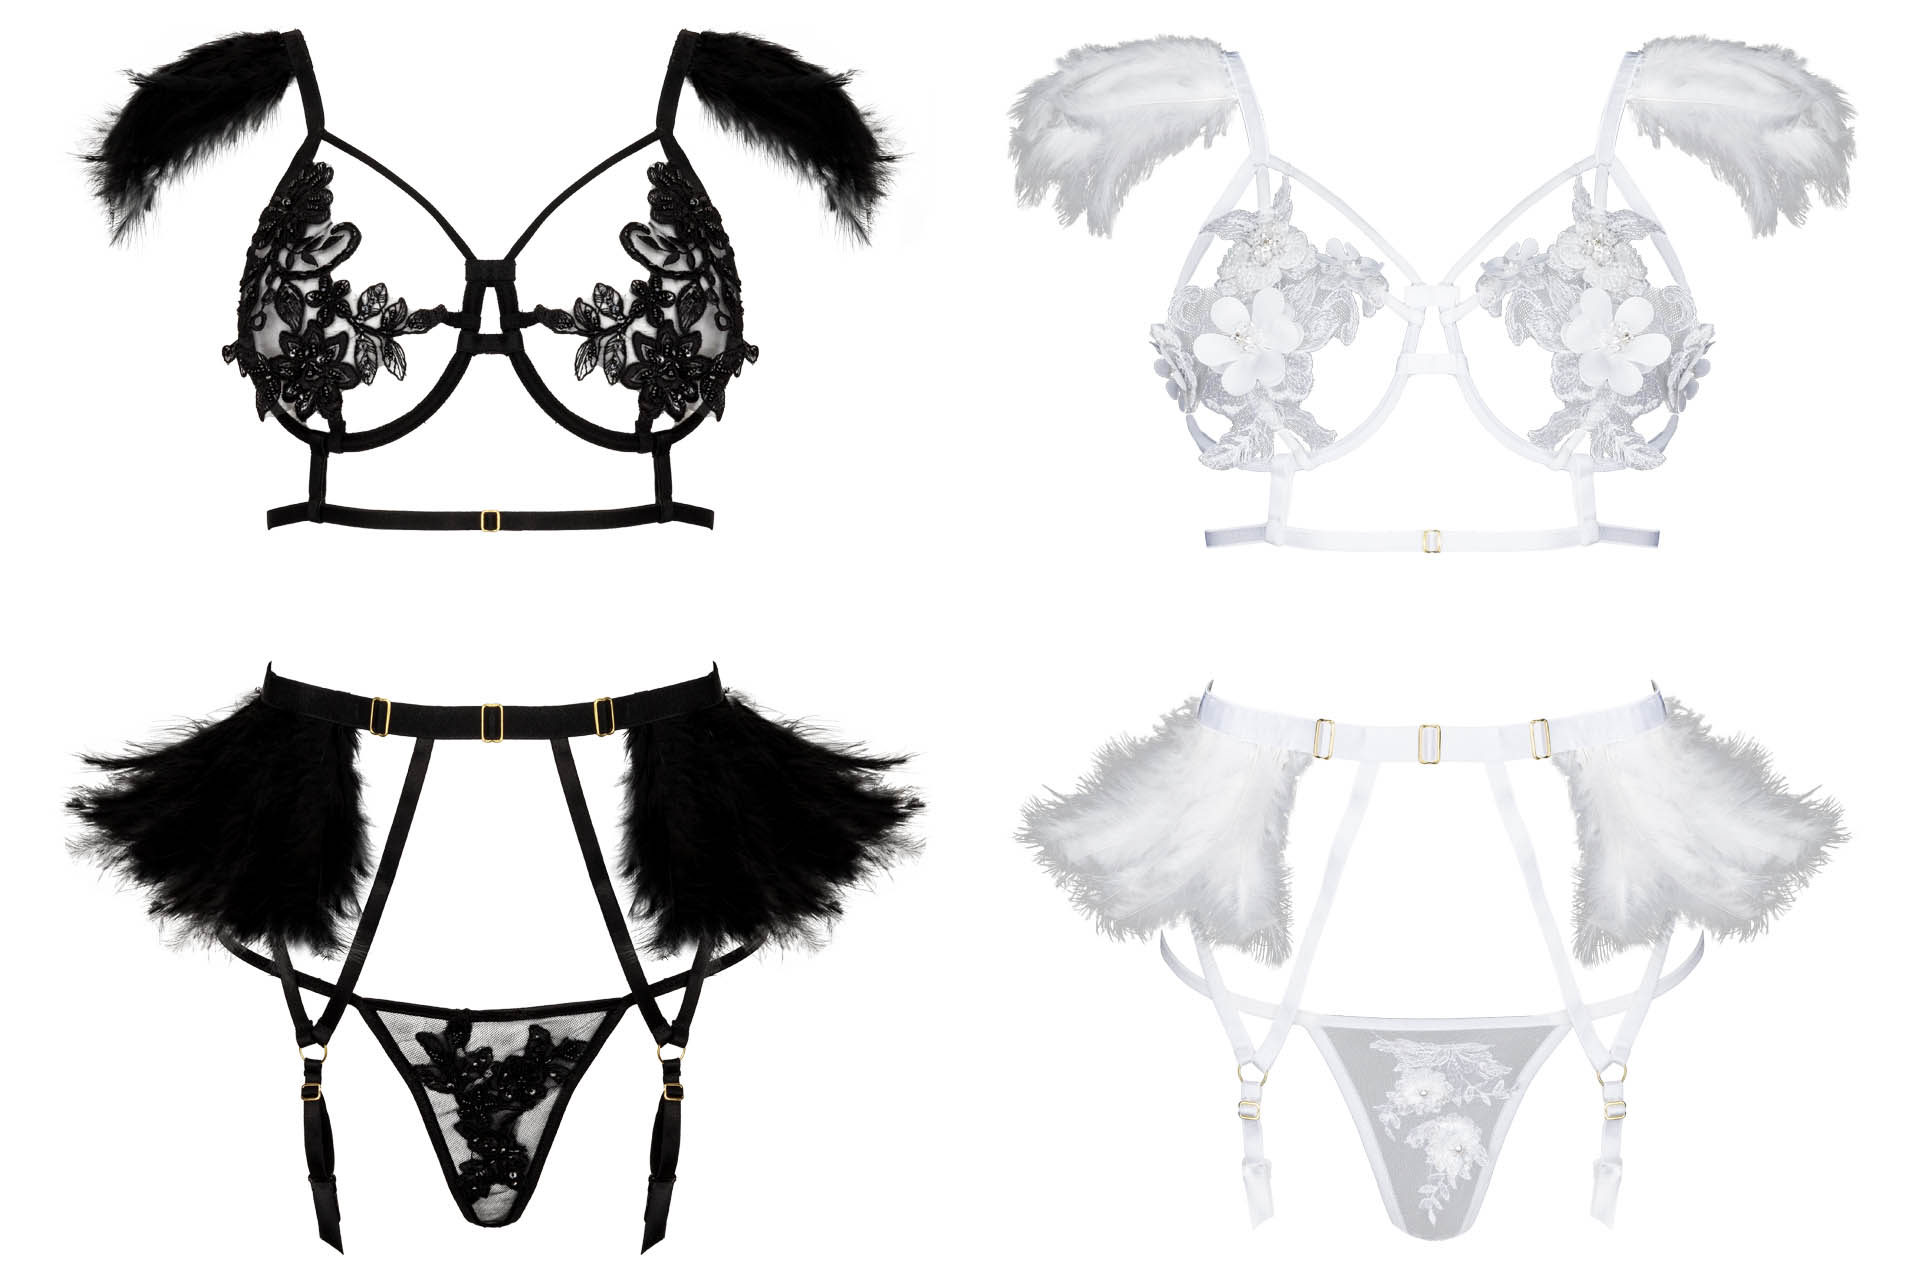 PRODUCT PHOTOS OF LINGERIE – GHOST PHOTOS